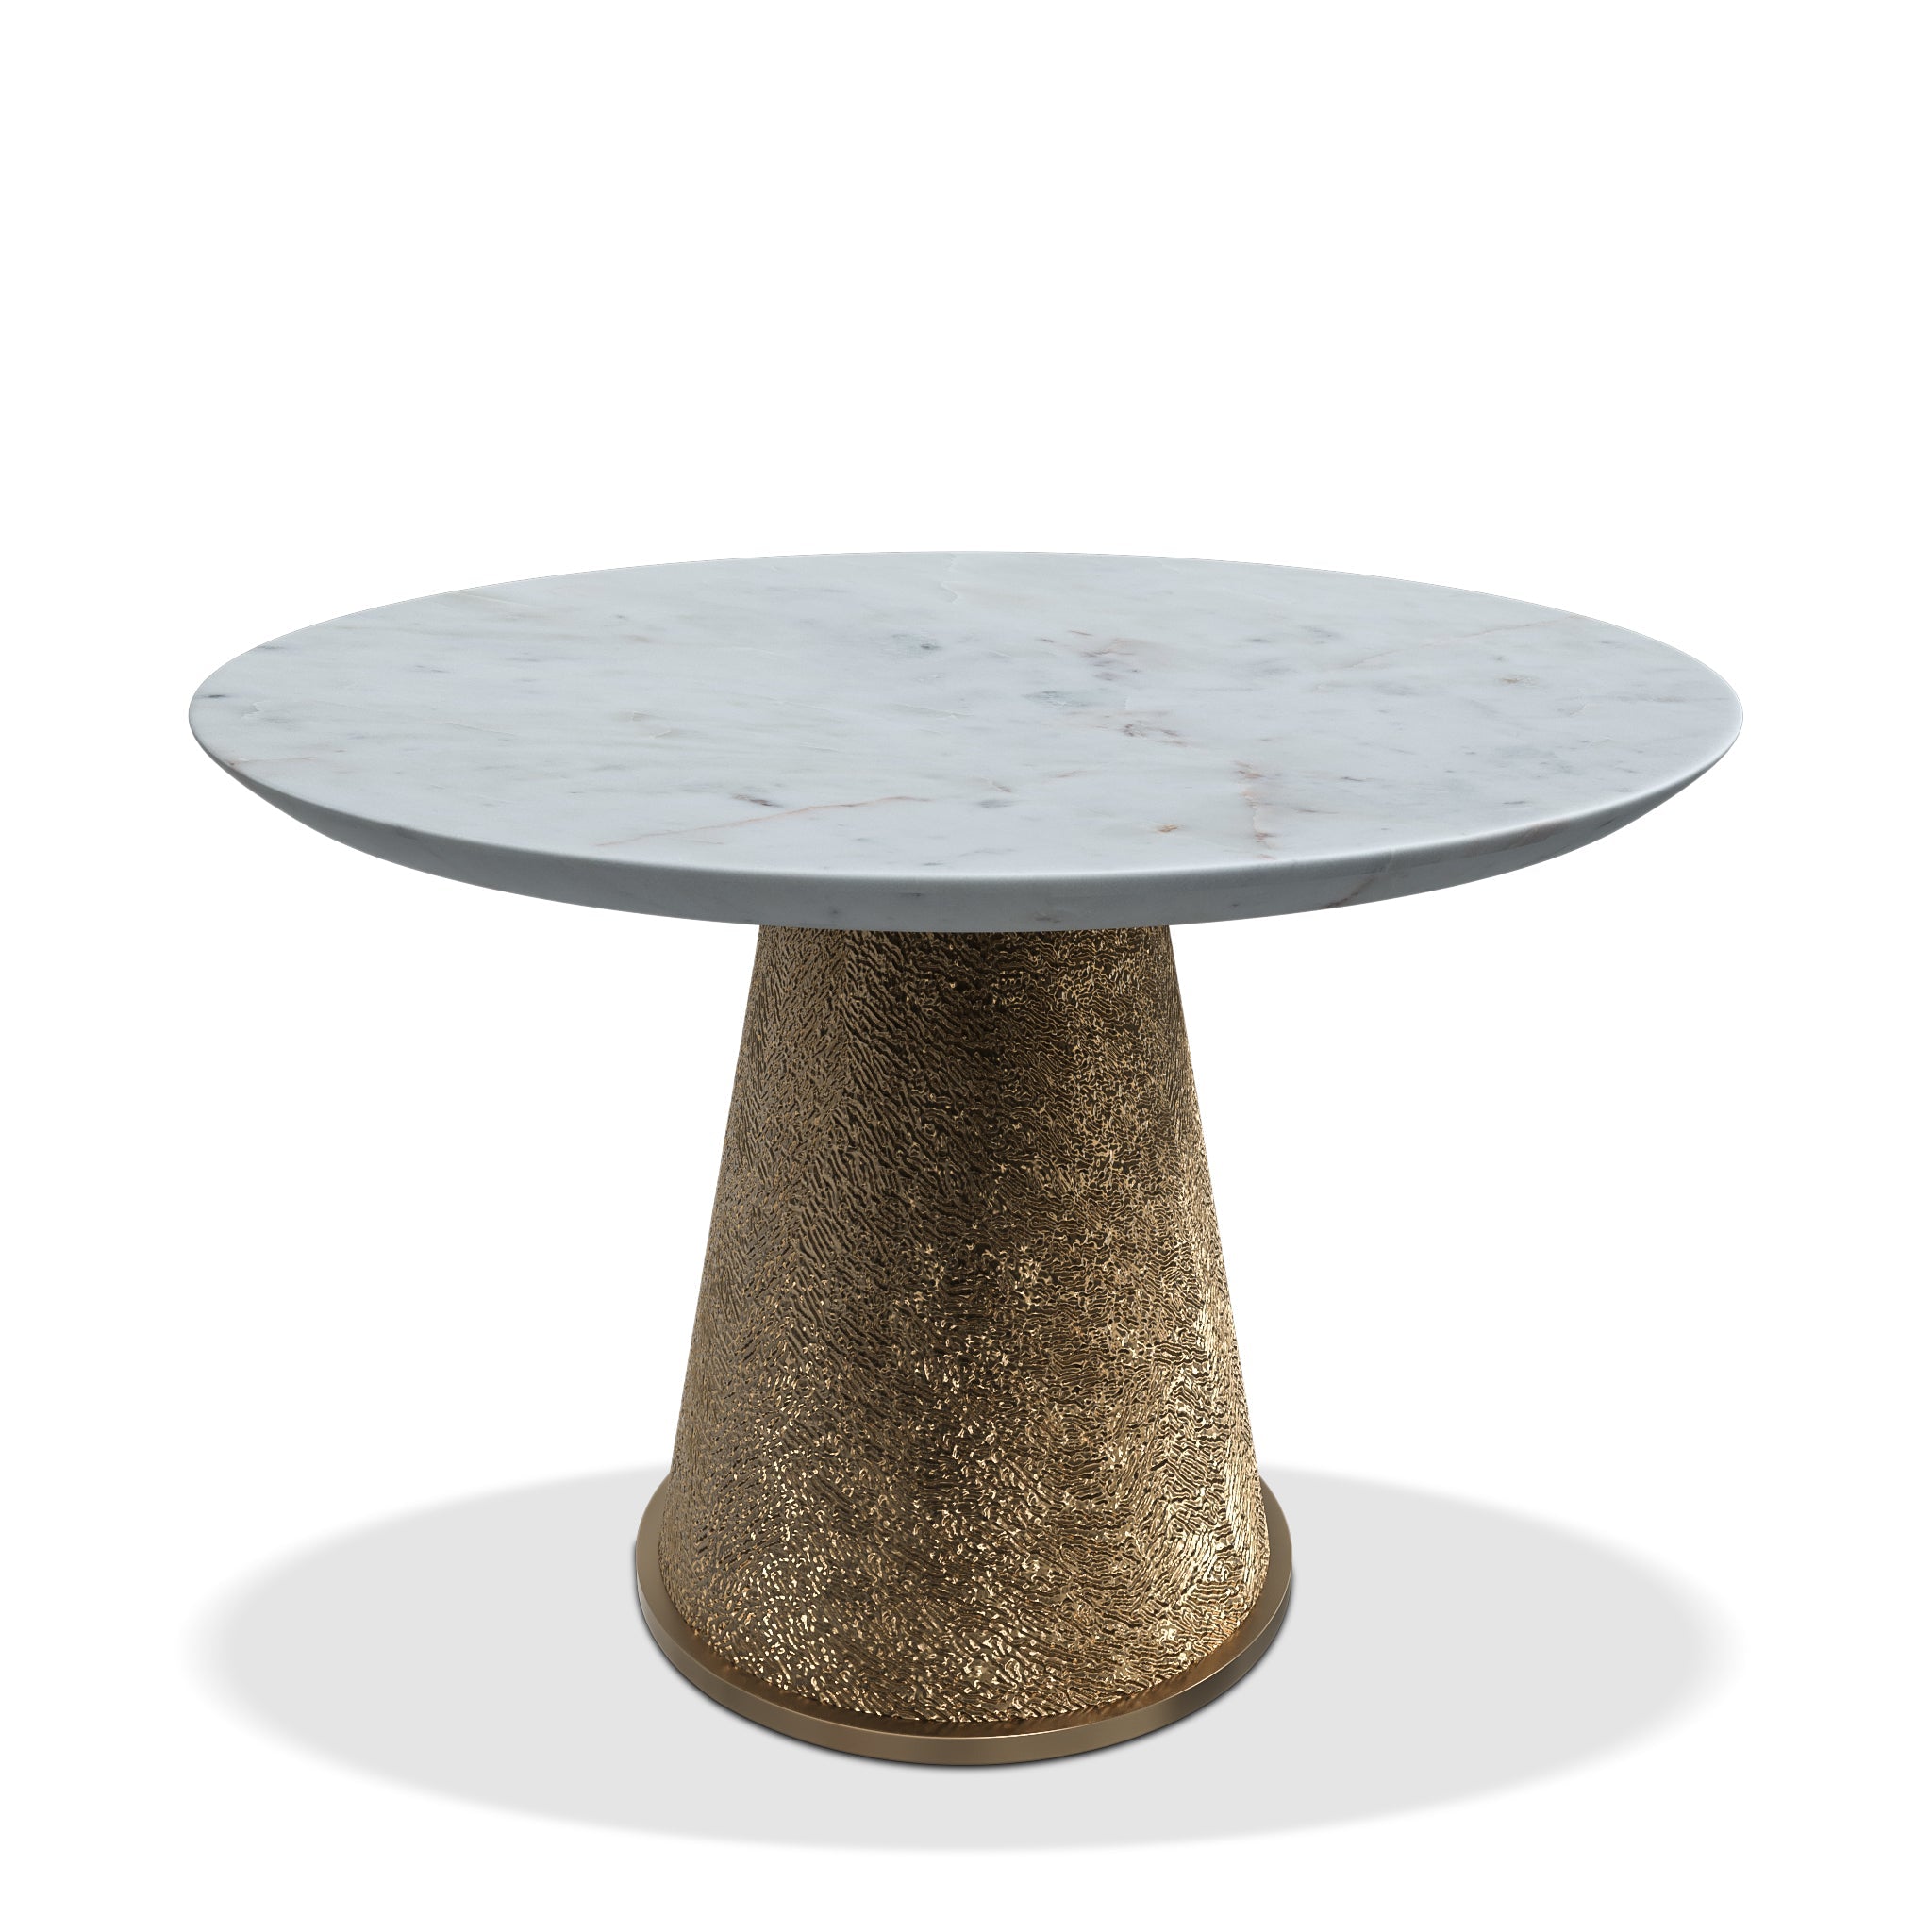 ANDAMAN MEDIO ANTIQUE BRASS ROUND DINING TABLE